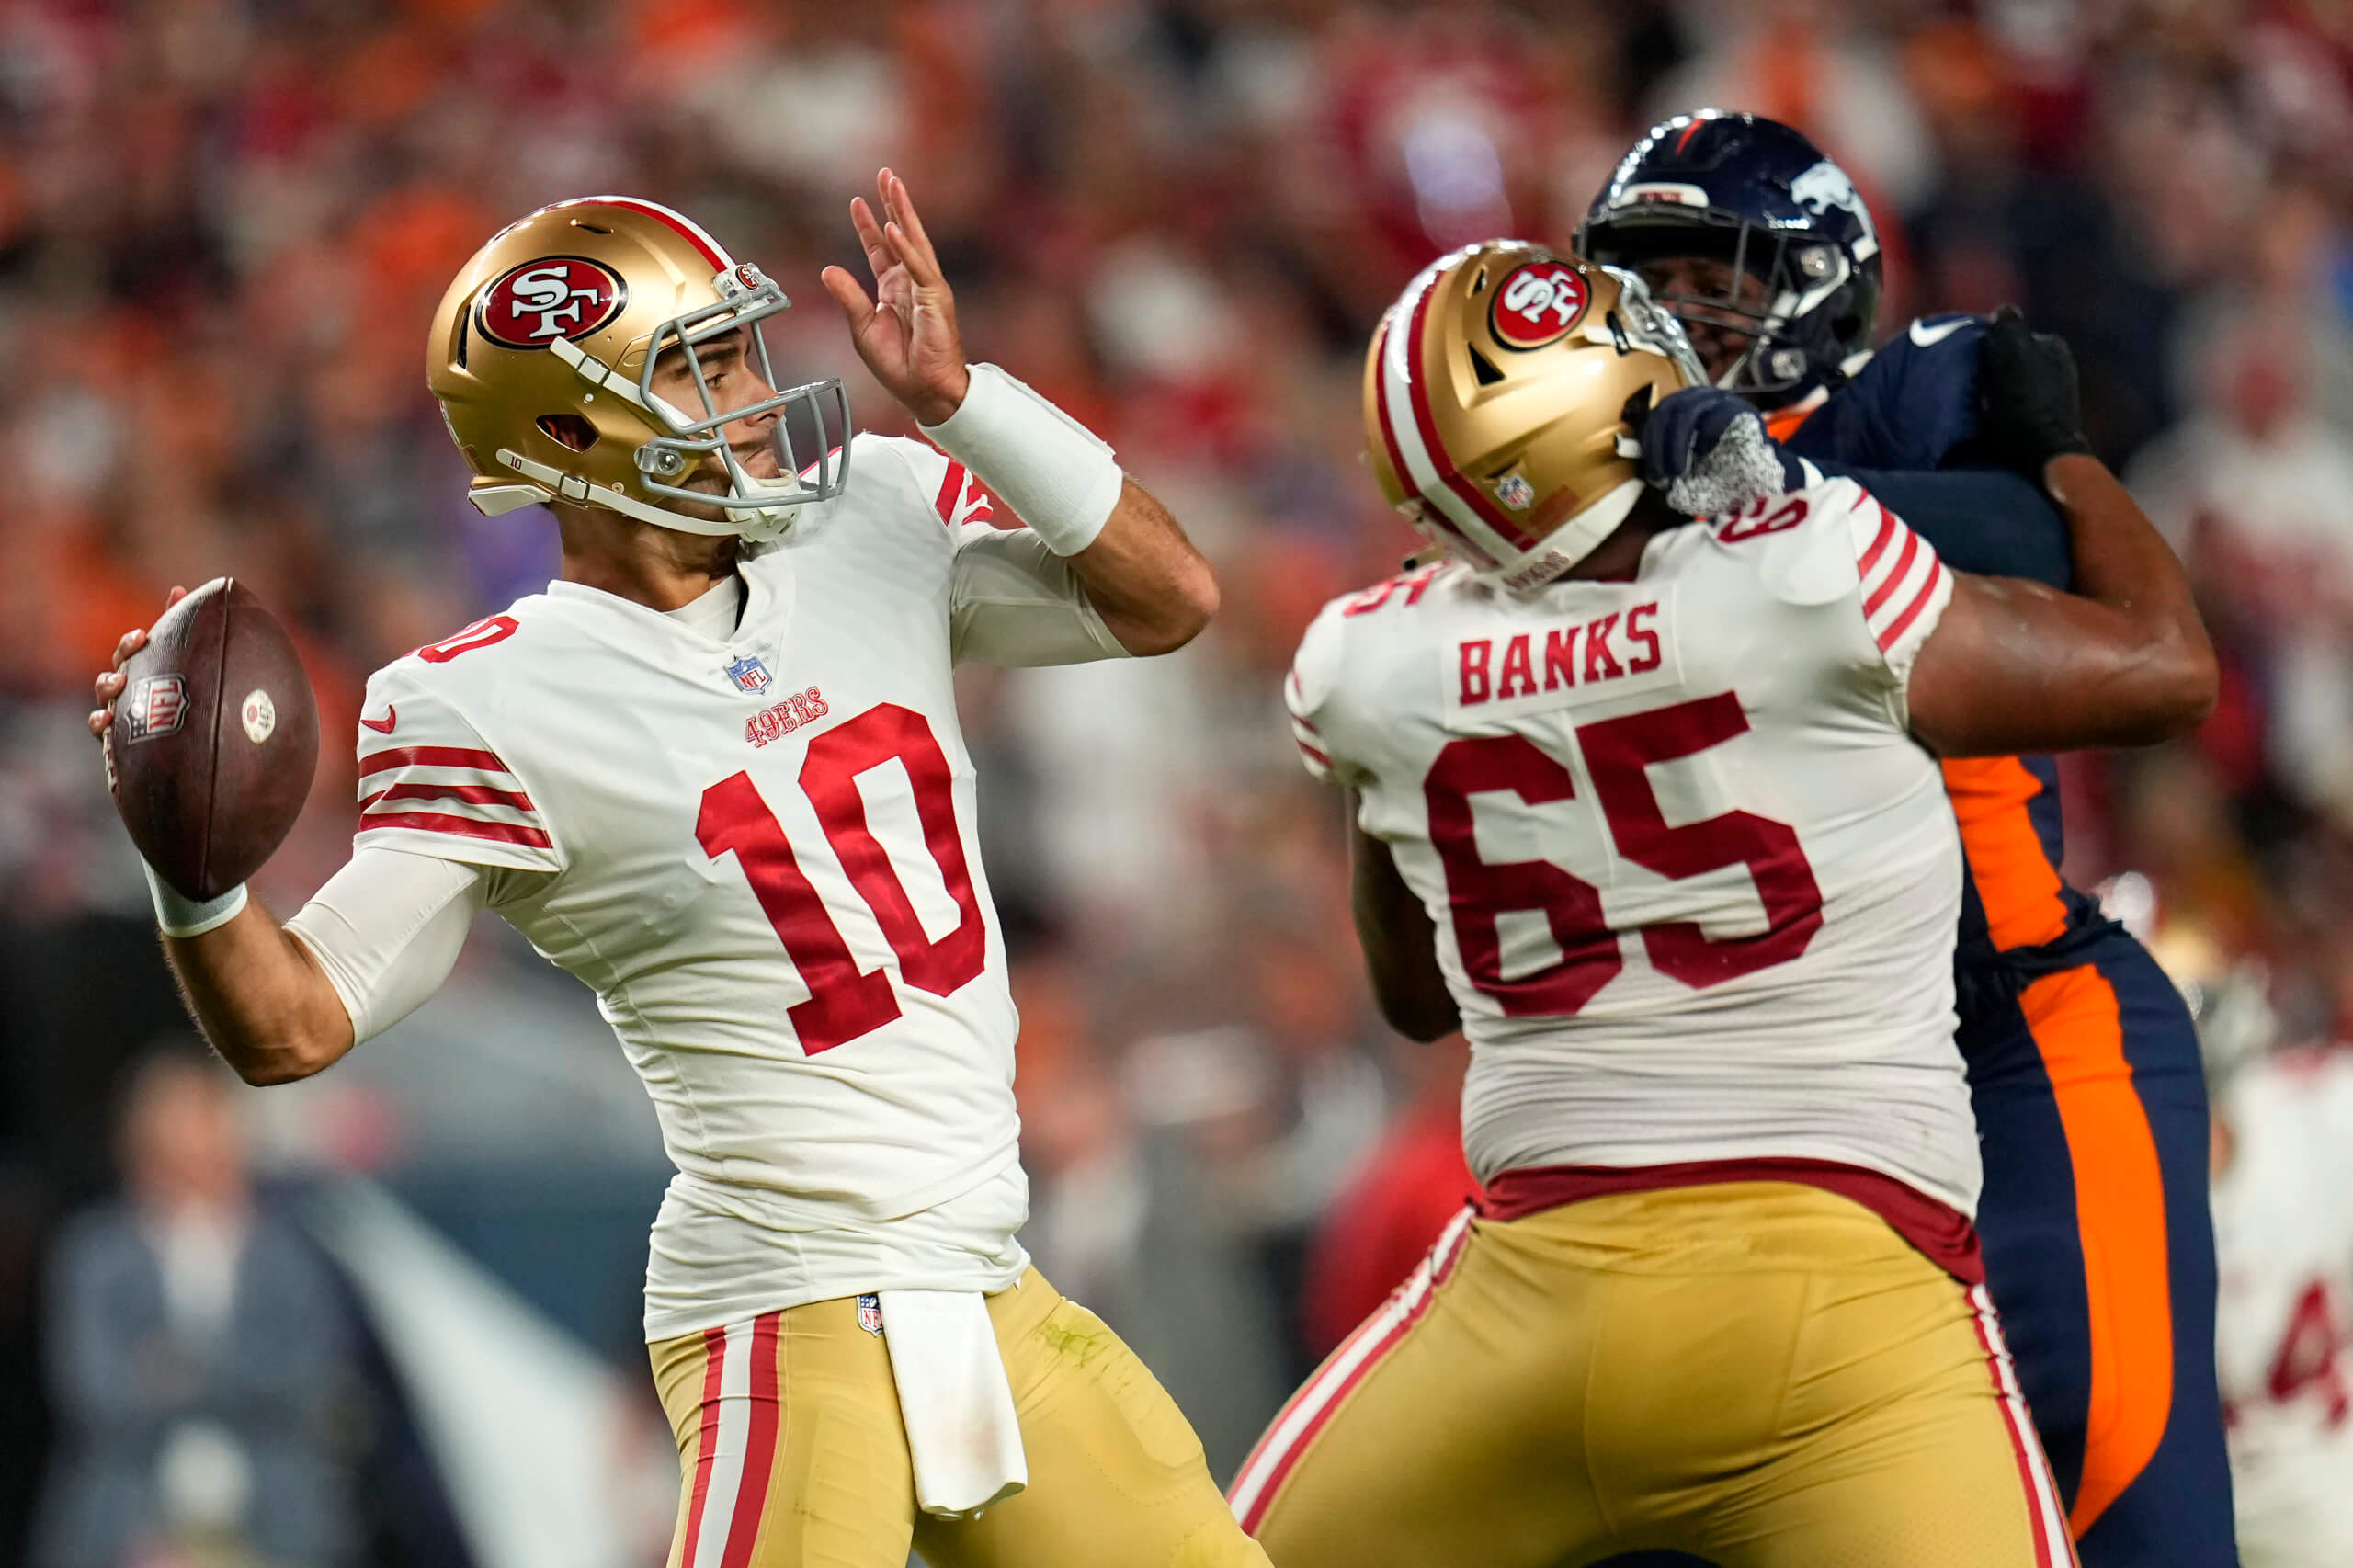 san francisco 49ers and the los angeles rams